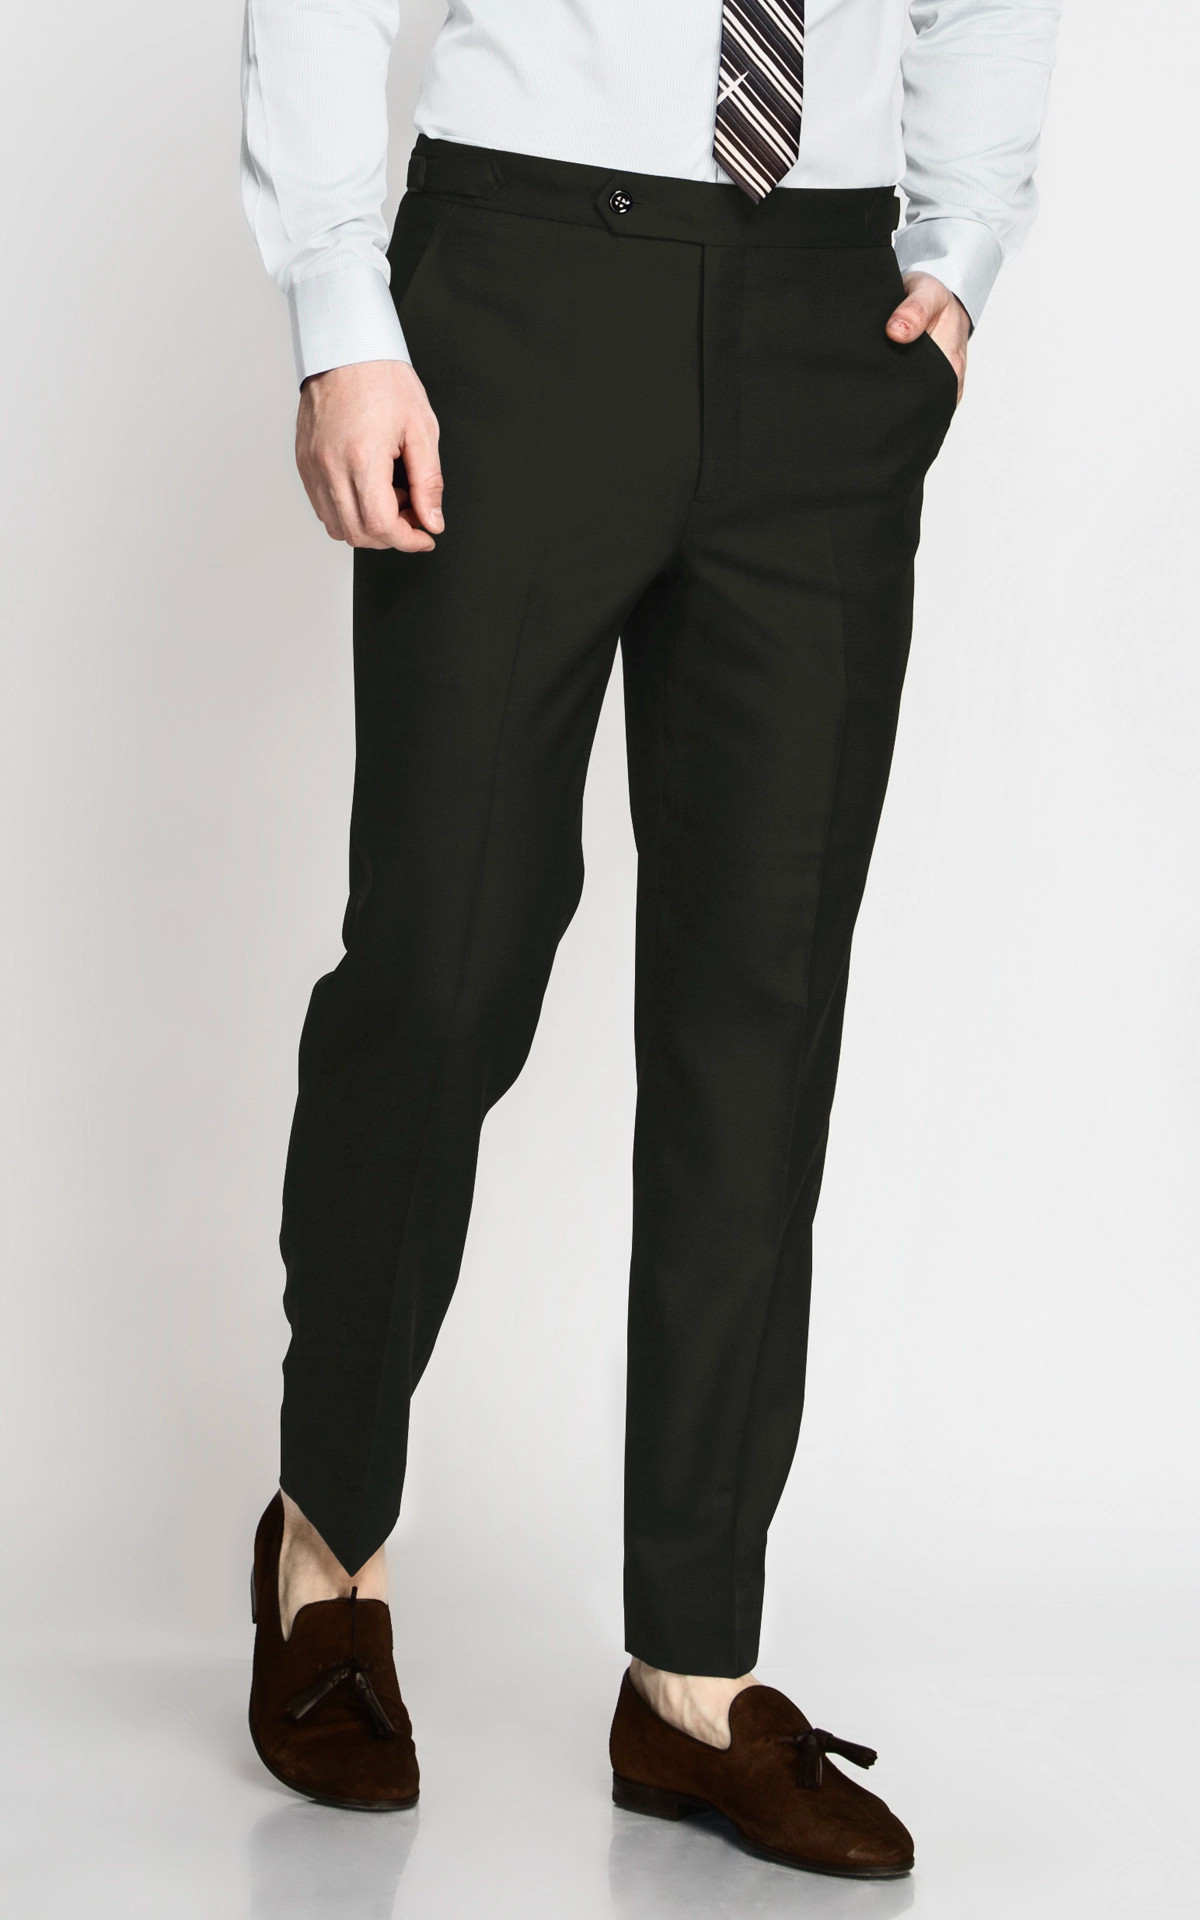 Ankle-Length Pants Men Stretch Business Classic Straigh Casual Formal  Trousers | eBay